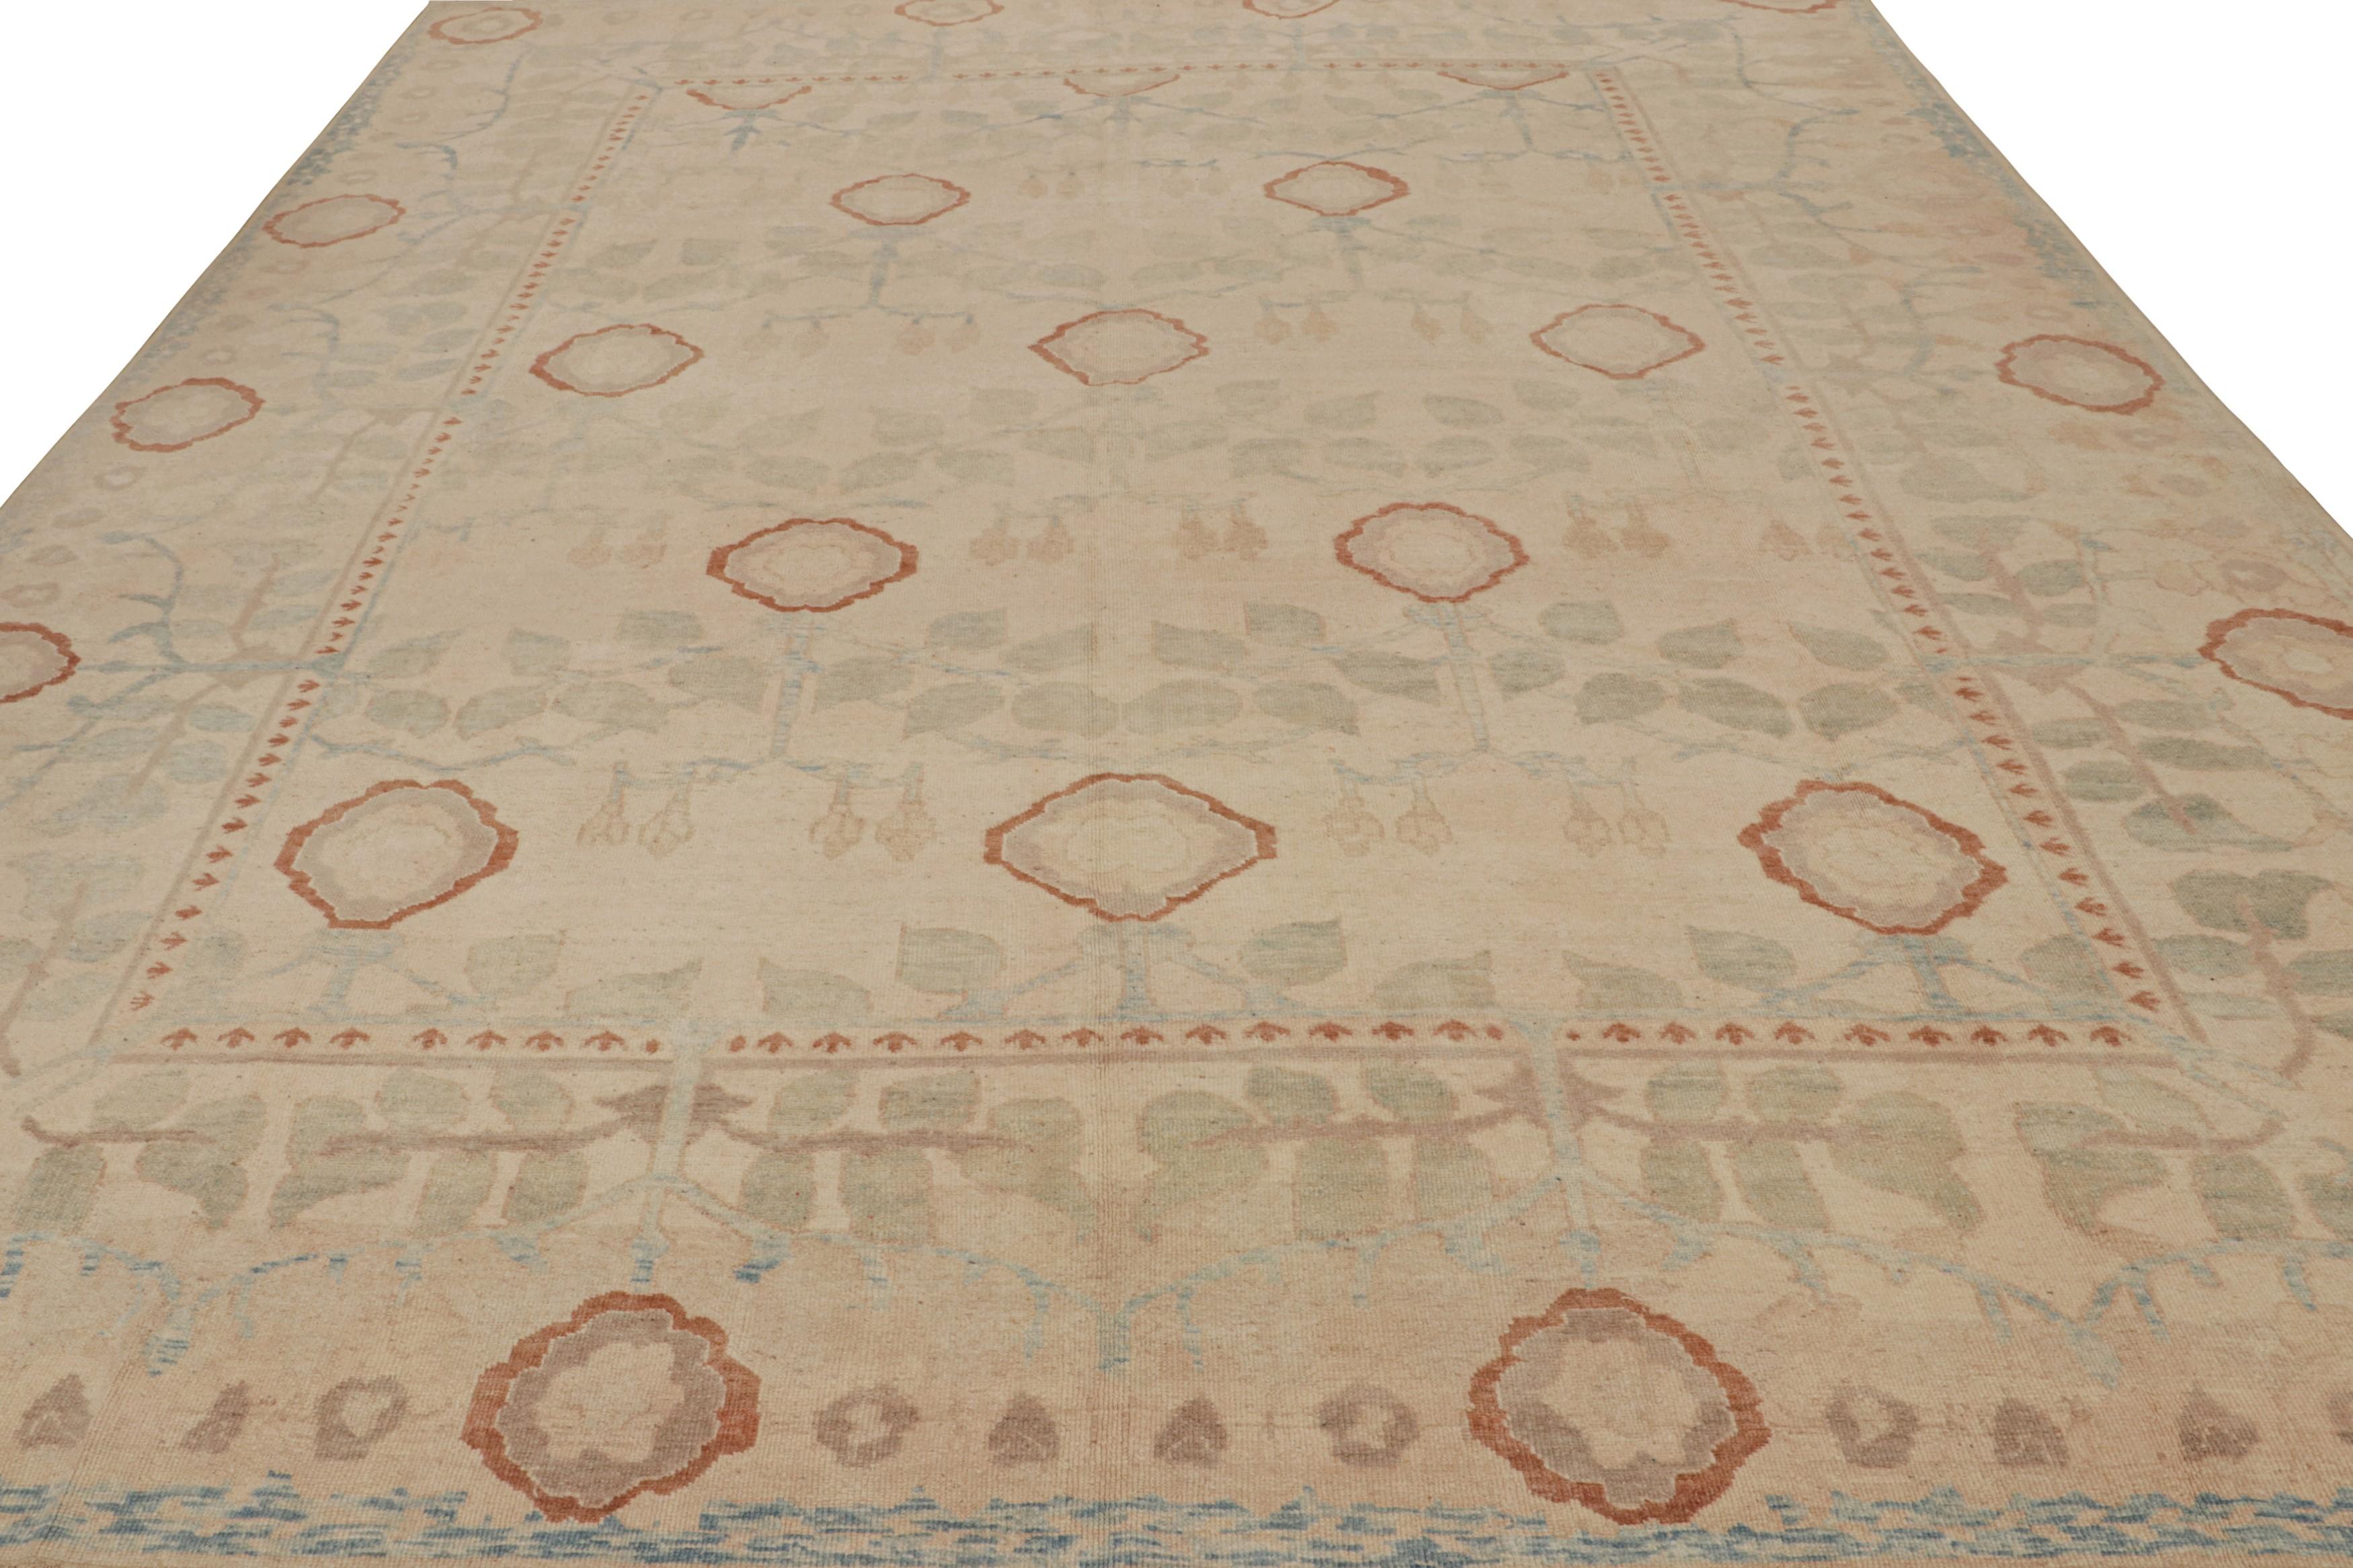 Turkish Antique Oushak Rug in Beige with Green and Blue Floral Patterns from Rug & Kilim For Sale